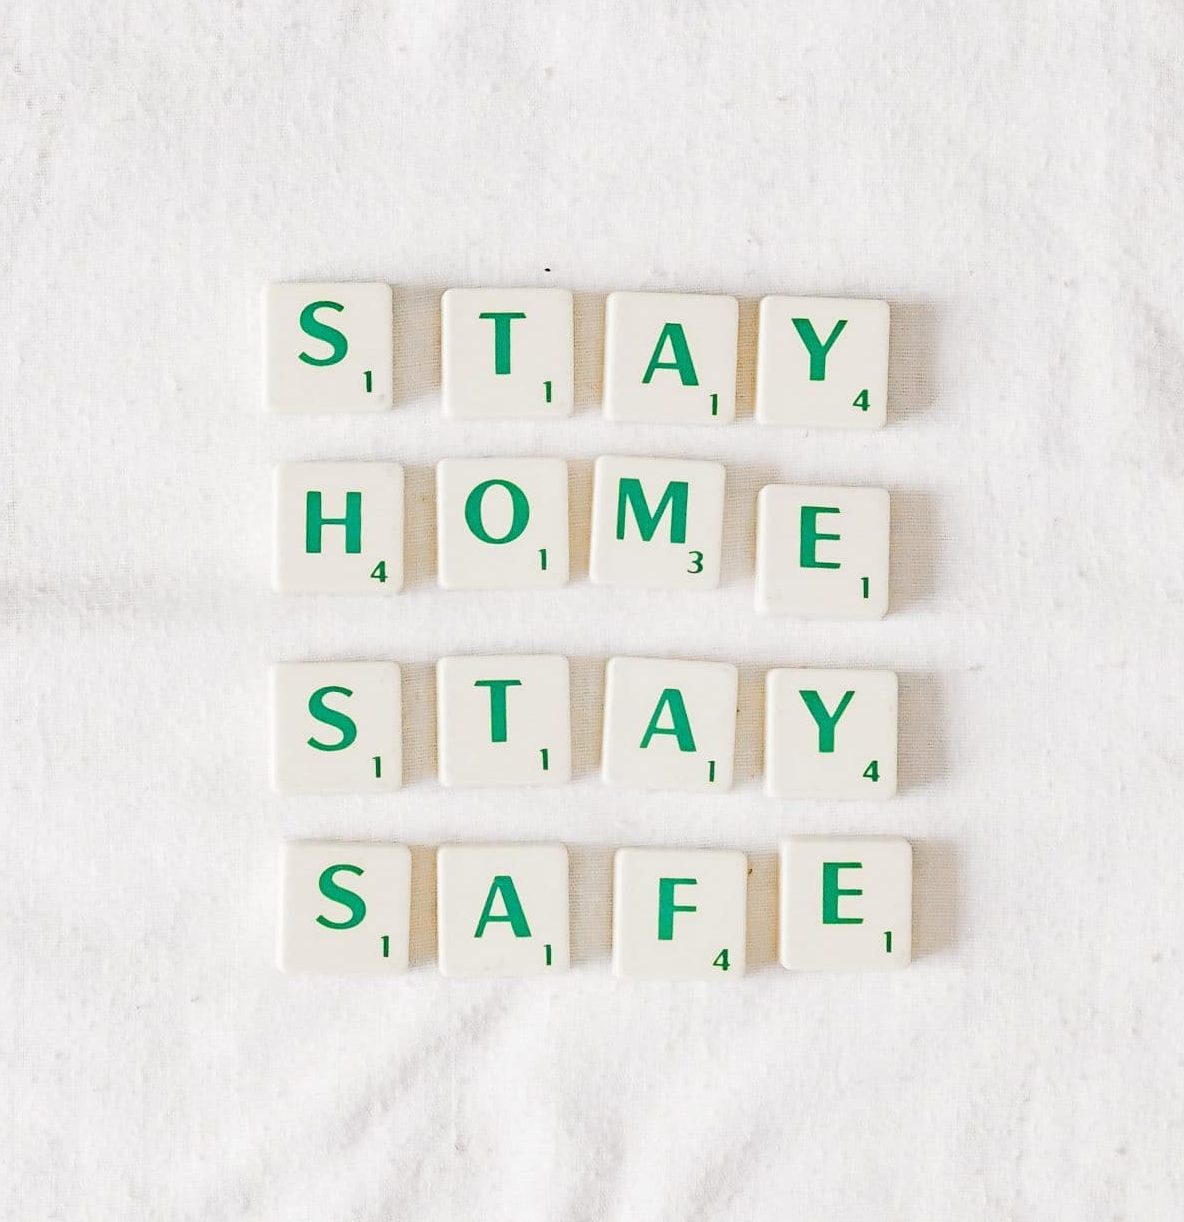 stay home stay safe quote